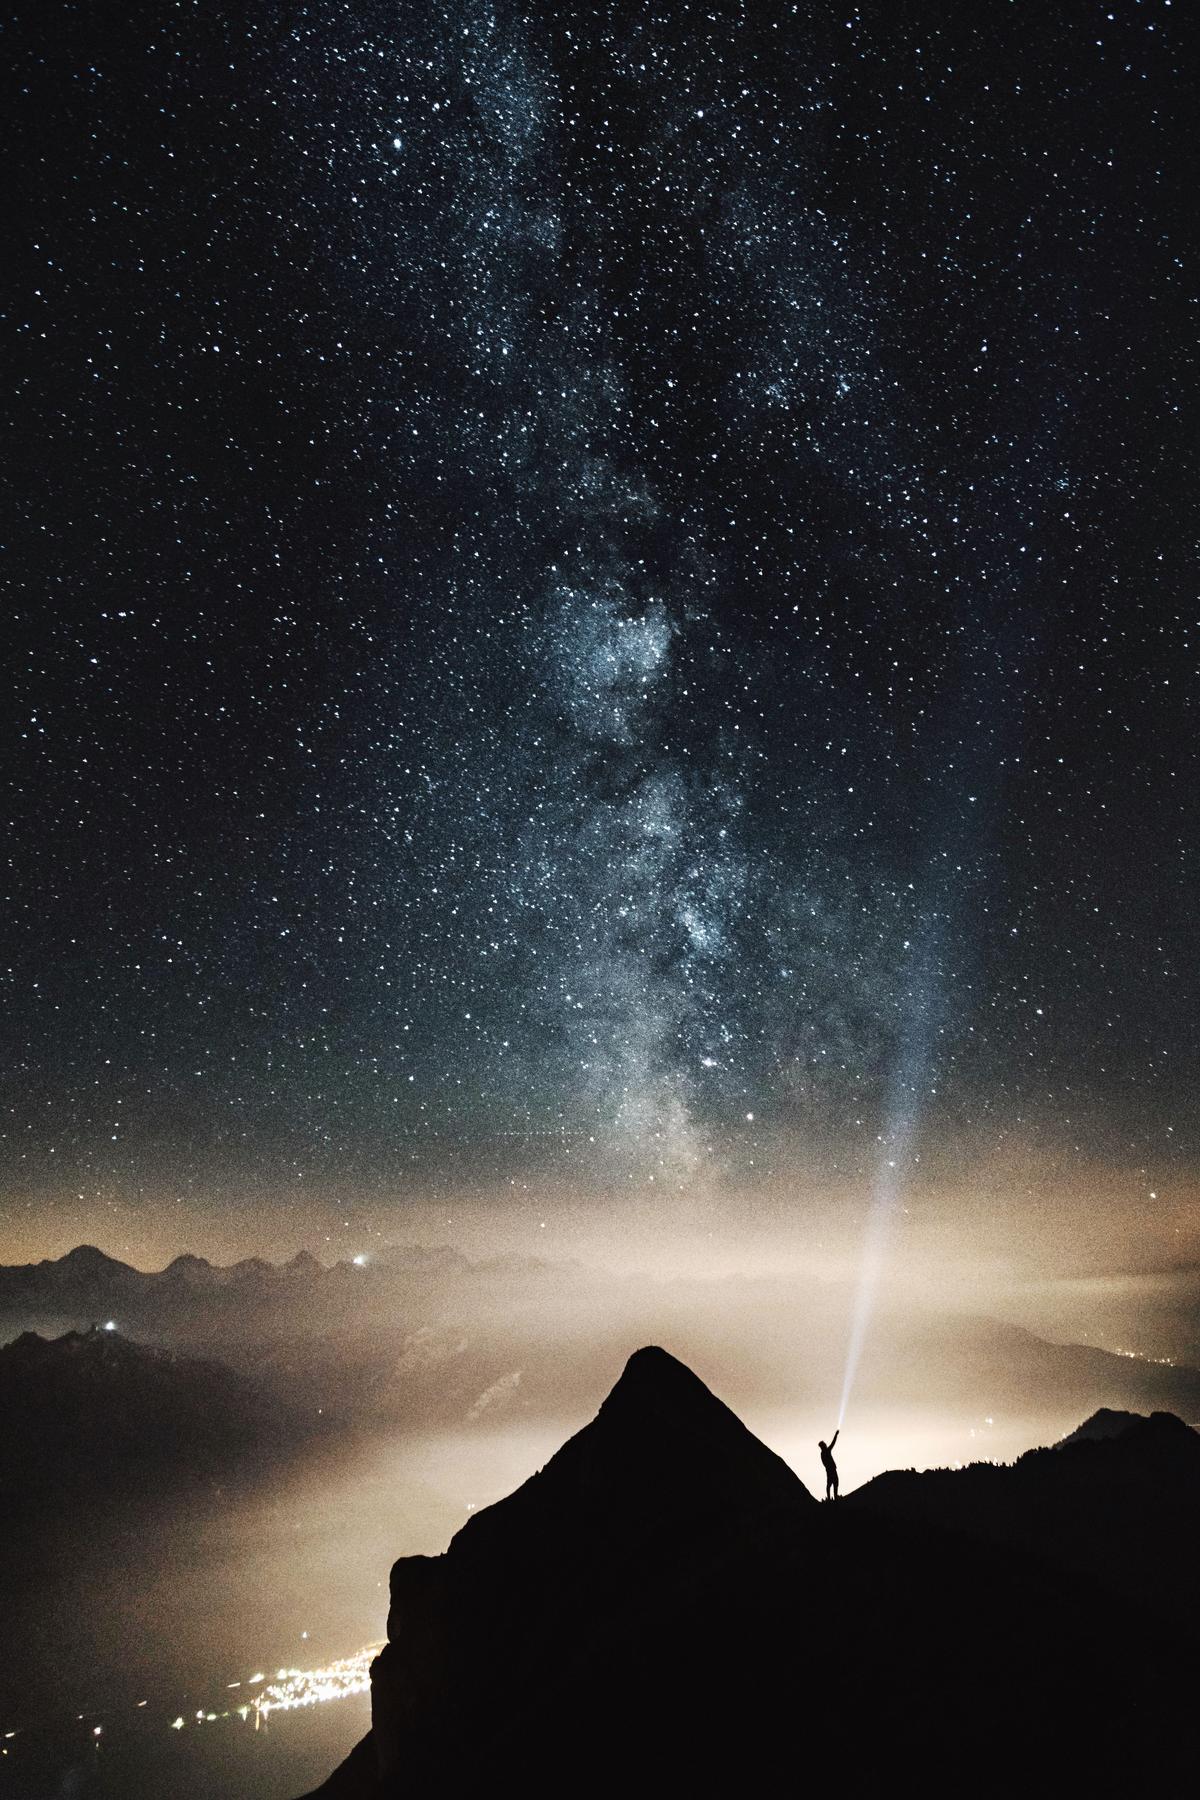 Person standing on a mountain shining a laser into the night sky